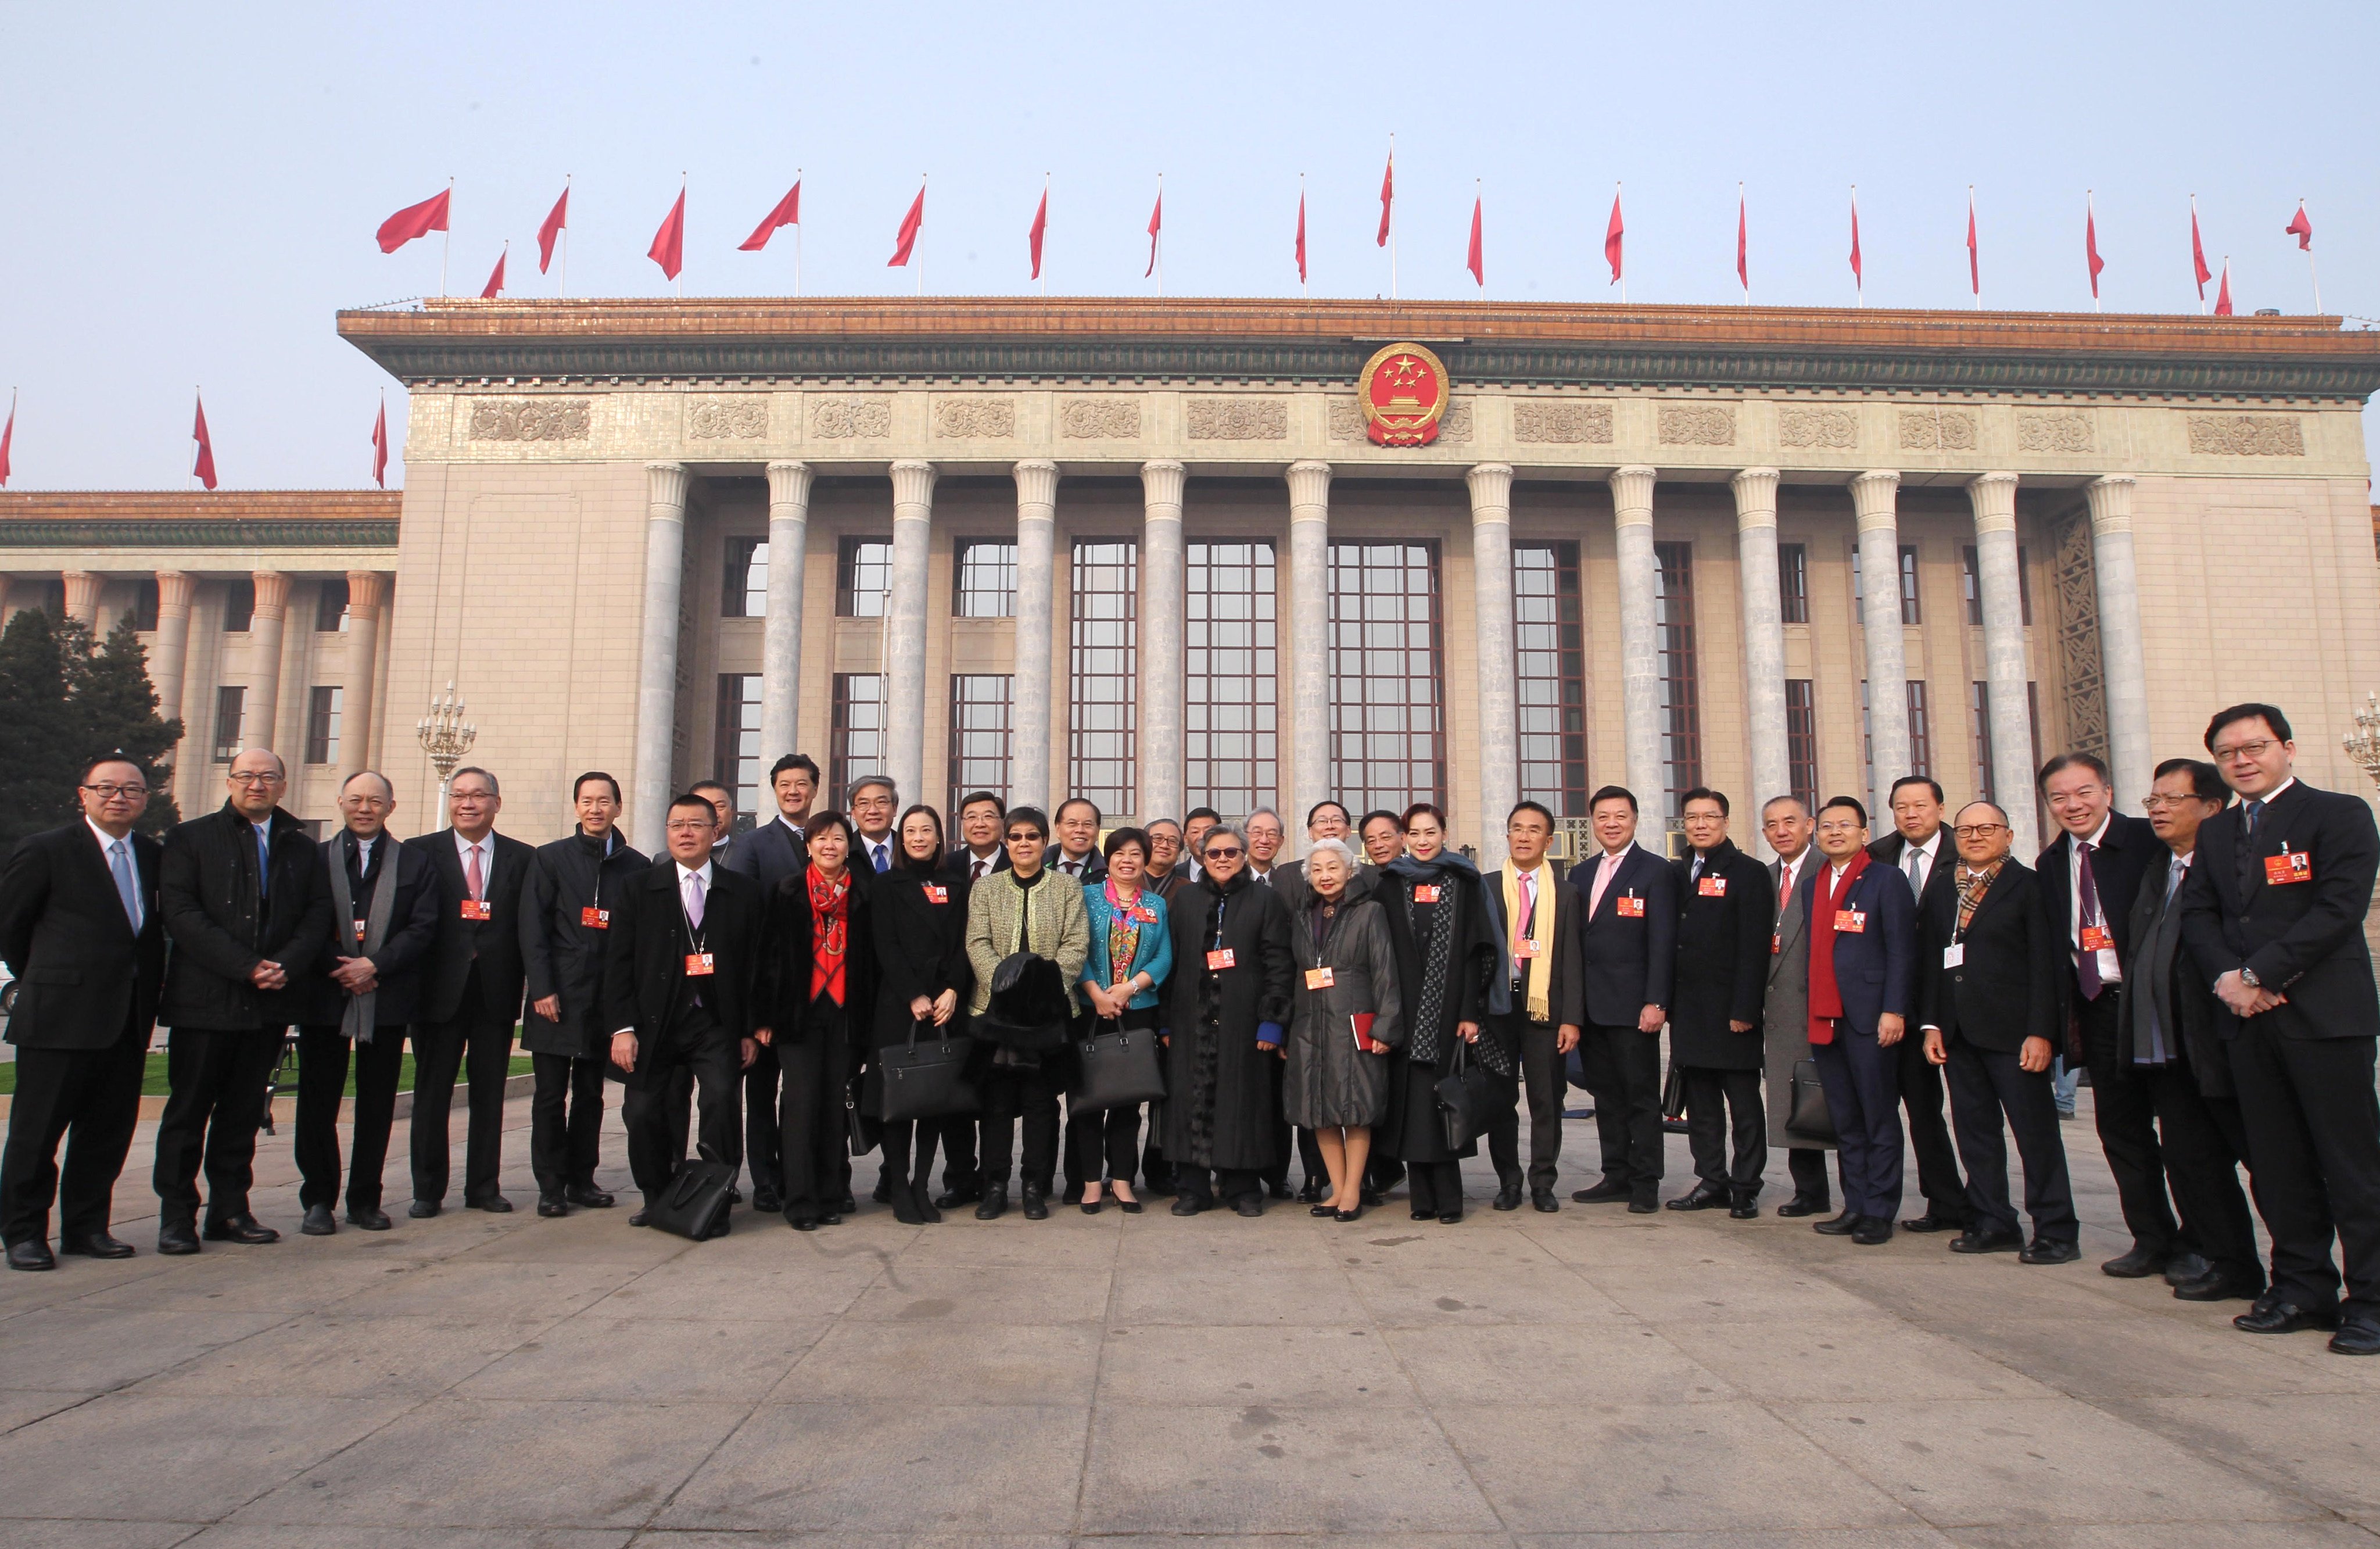 Hong Kong delegates to the NPC pose for a group photo before a session of the NPC meeting at the Great Hall of the People in Beijing, on March 13, 2018. Photo: Simon Song